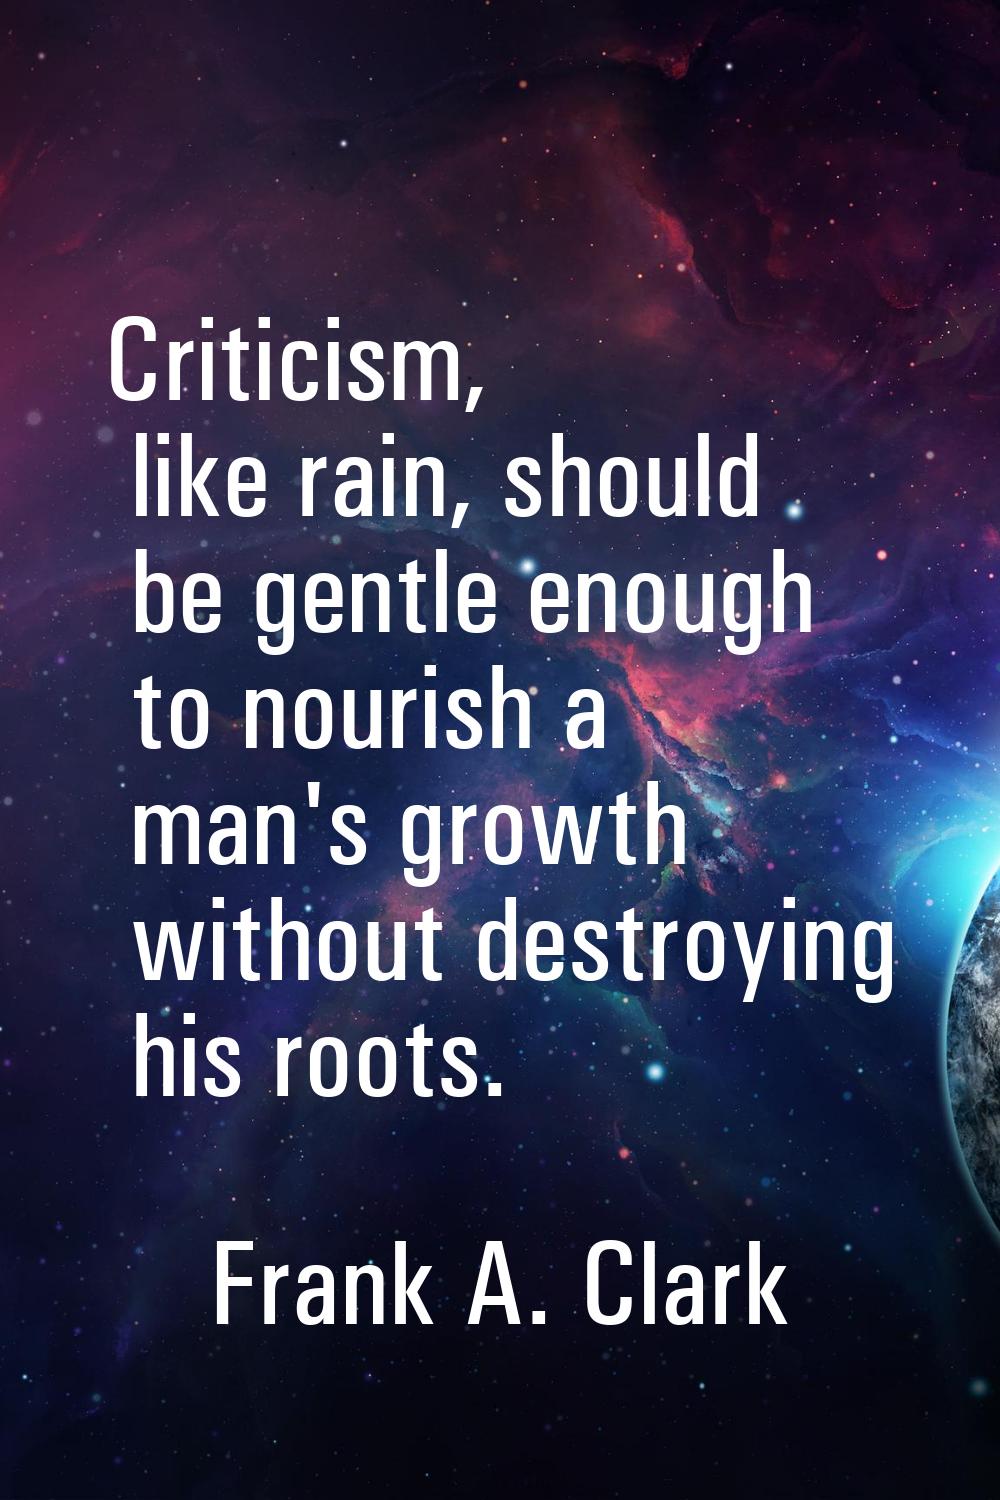 Criticism, like rain, should be gentle enough to nourish a man's growth without destroying his root